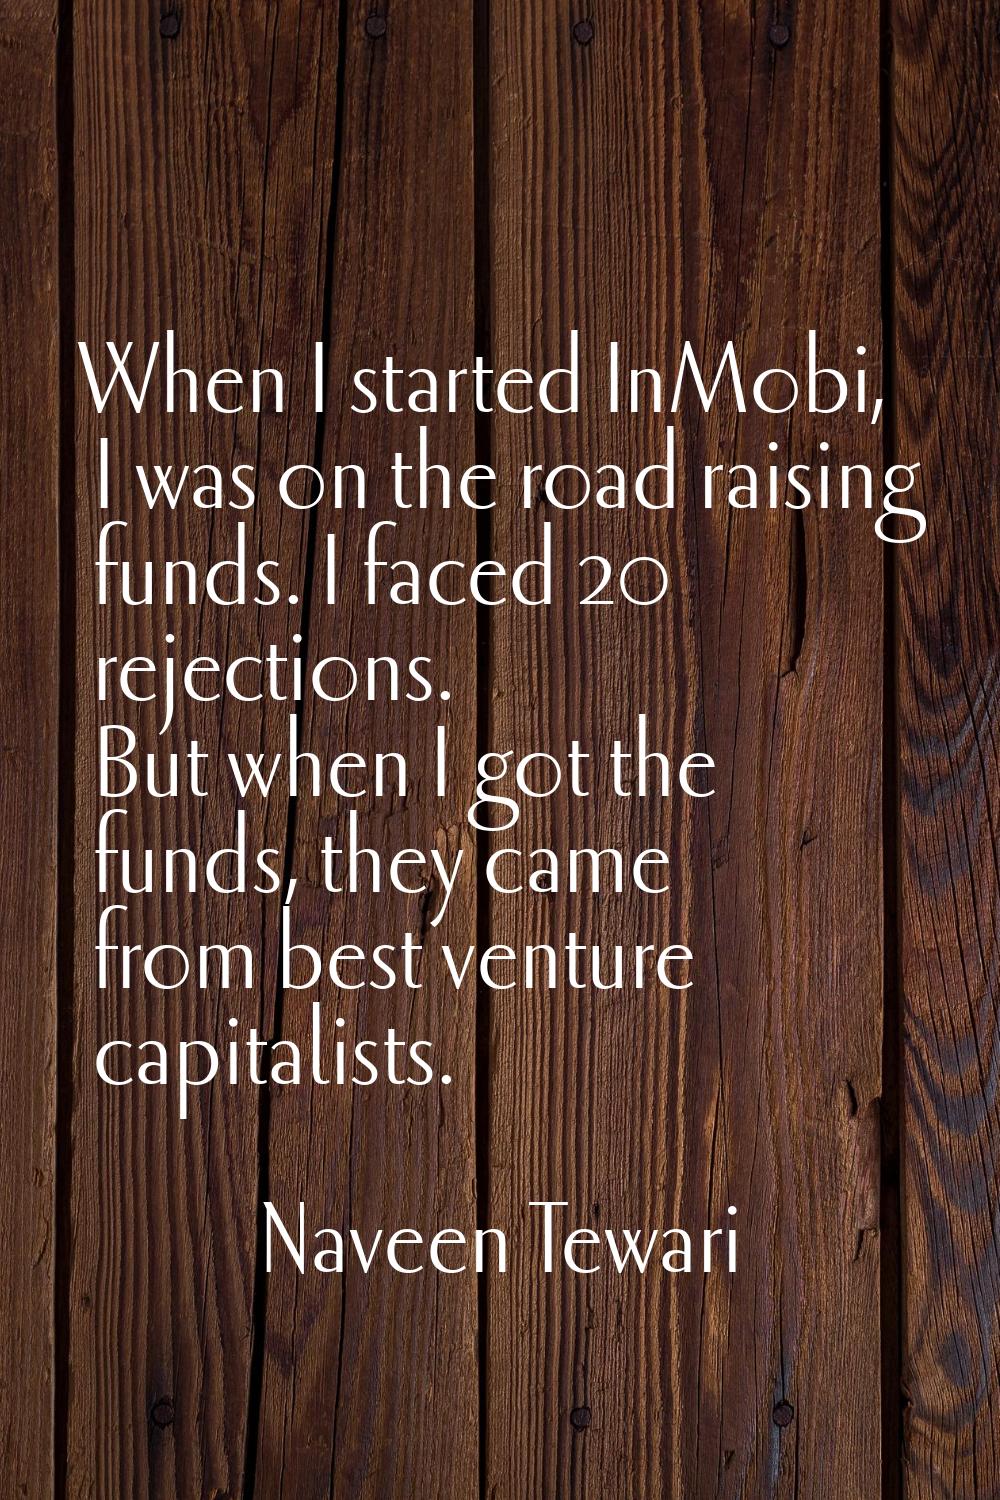 When I started InMobi, I was on the road raising funds. I faced 20 rejections. But when I got the f